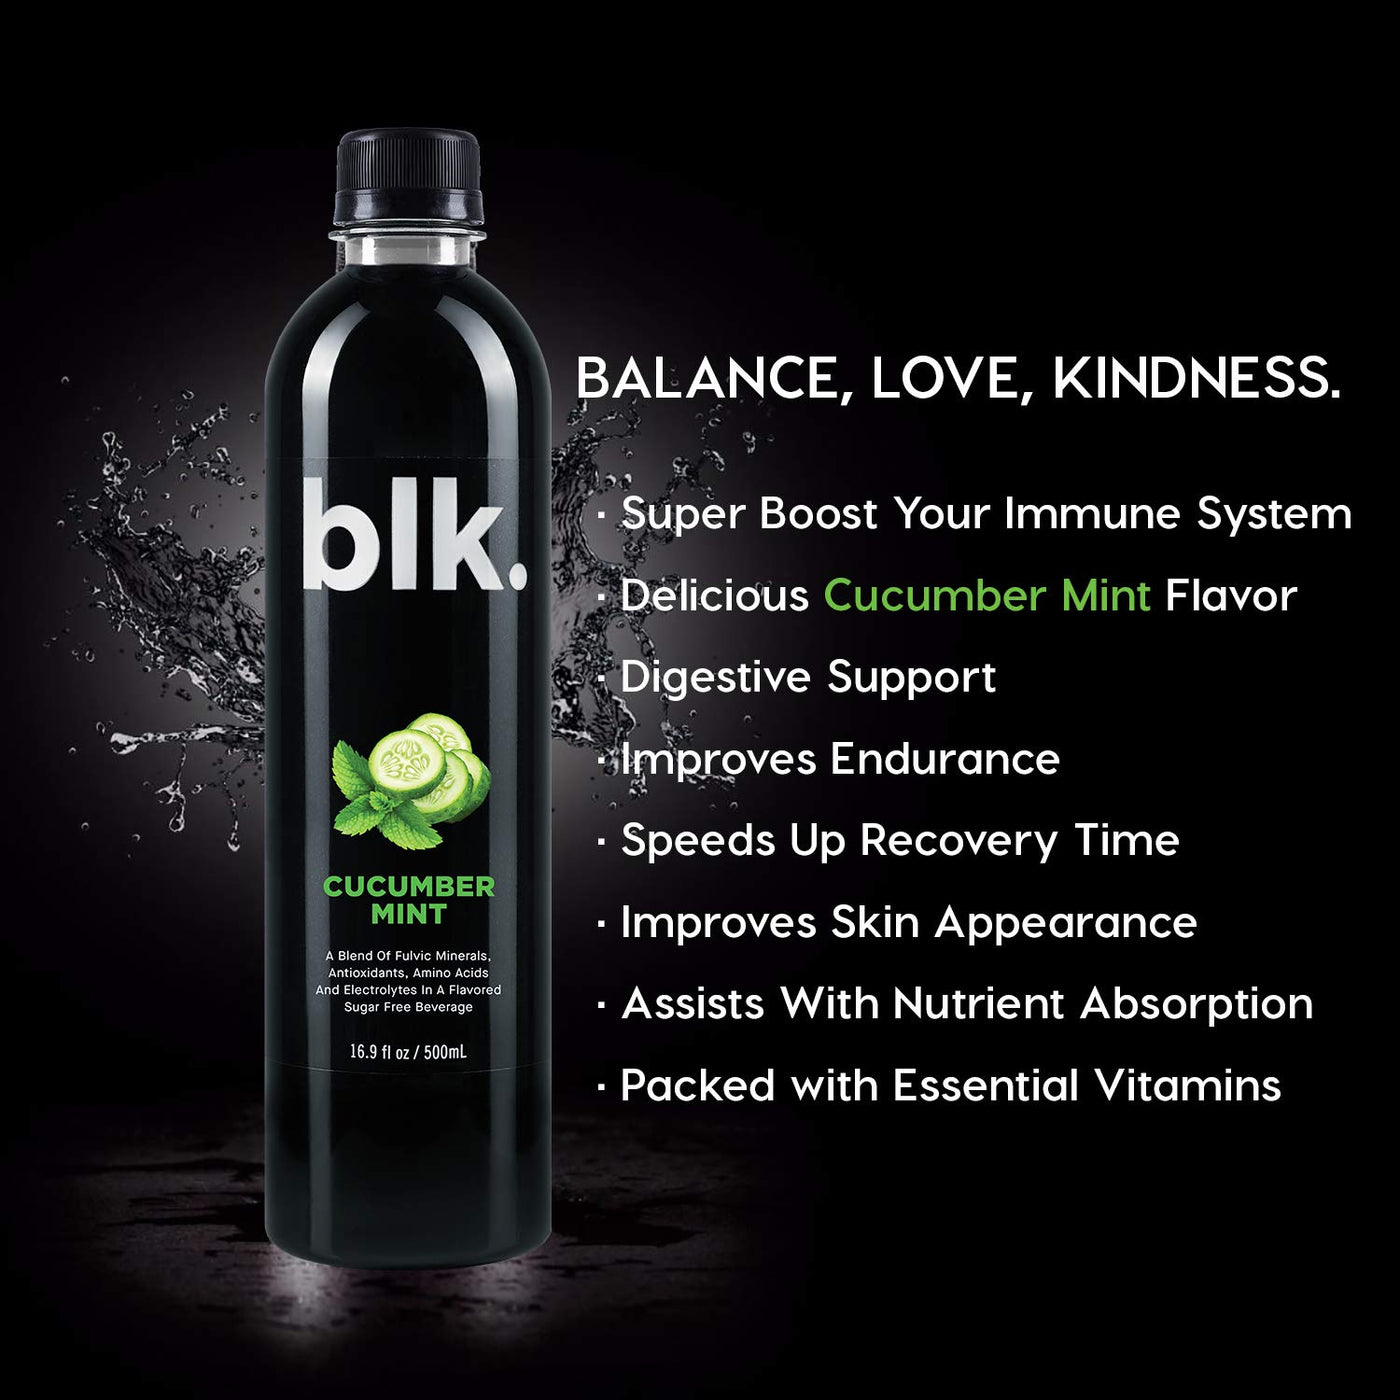 super boost your immune system, delicious cucumber mint flavour, digestive support, improves endurance, speeds up recovery time, improves skin appearance, assists with nutrient absorption, packed with essential vitamins